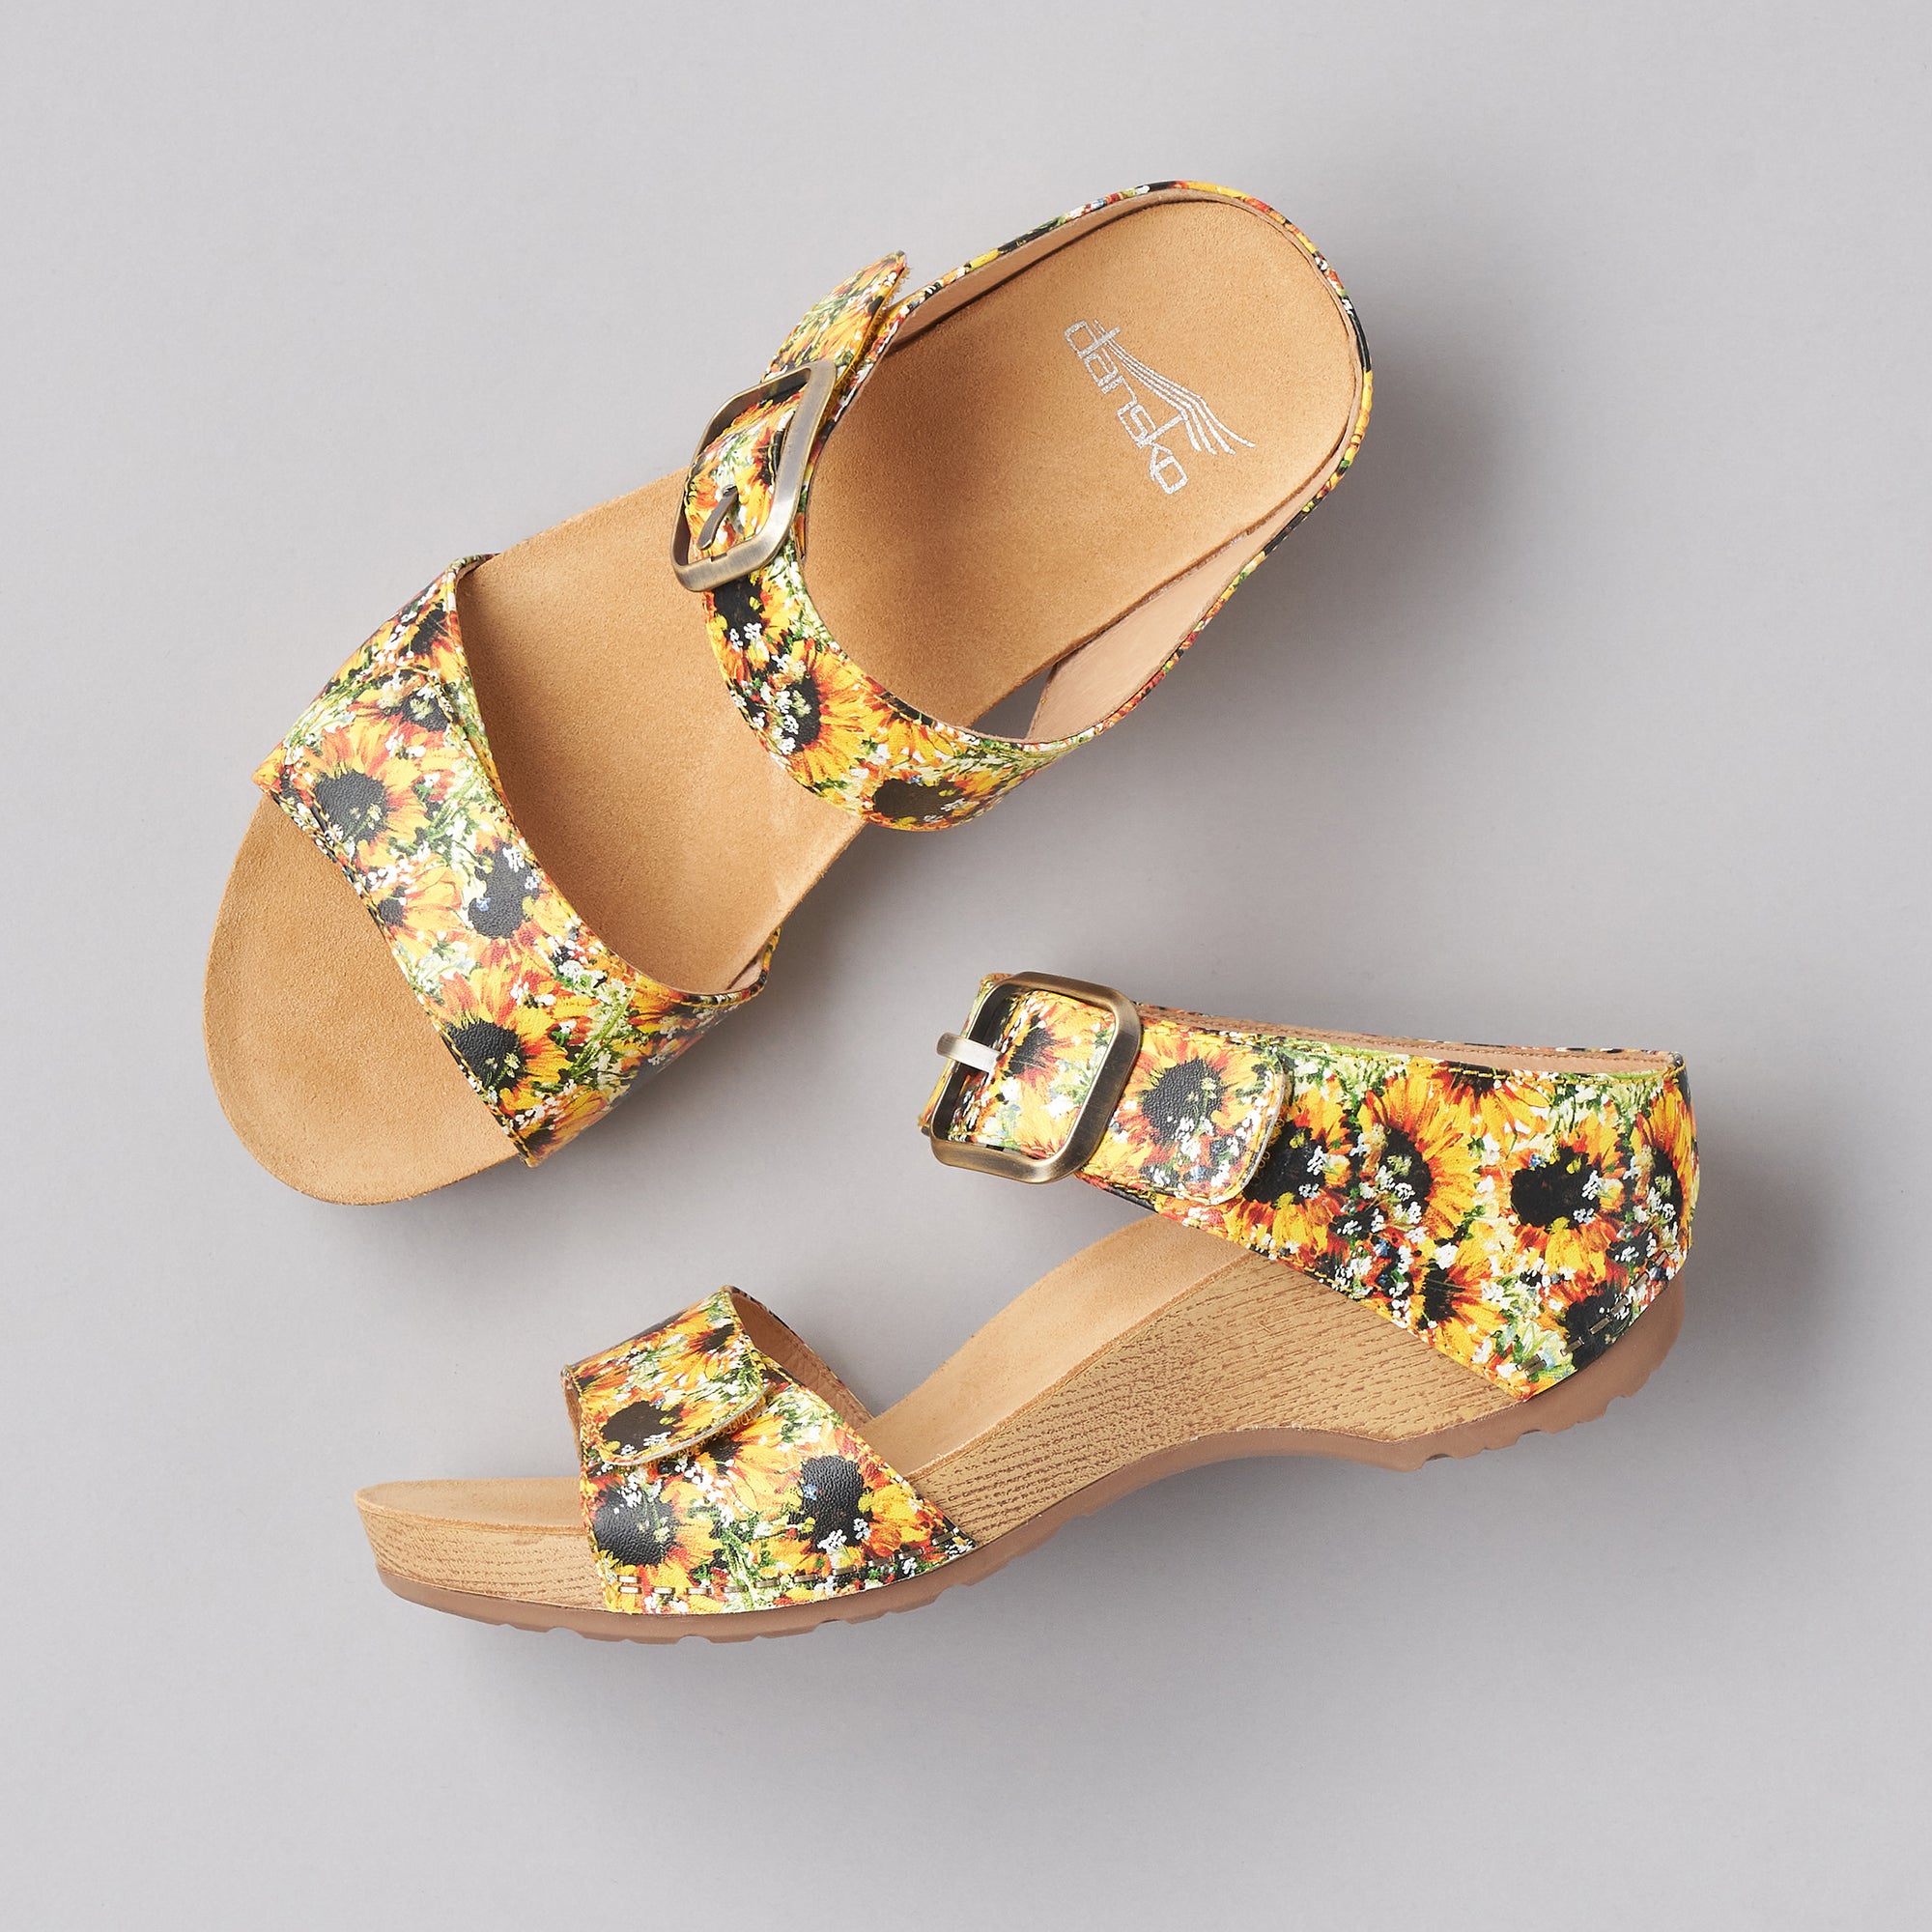 Comfortable two-strap sandals with a bright sunflower print on adjustable straps.